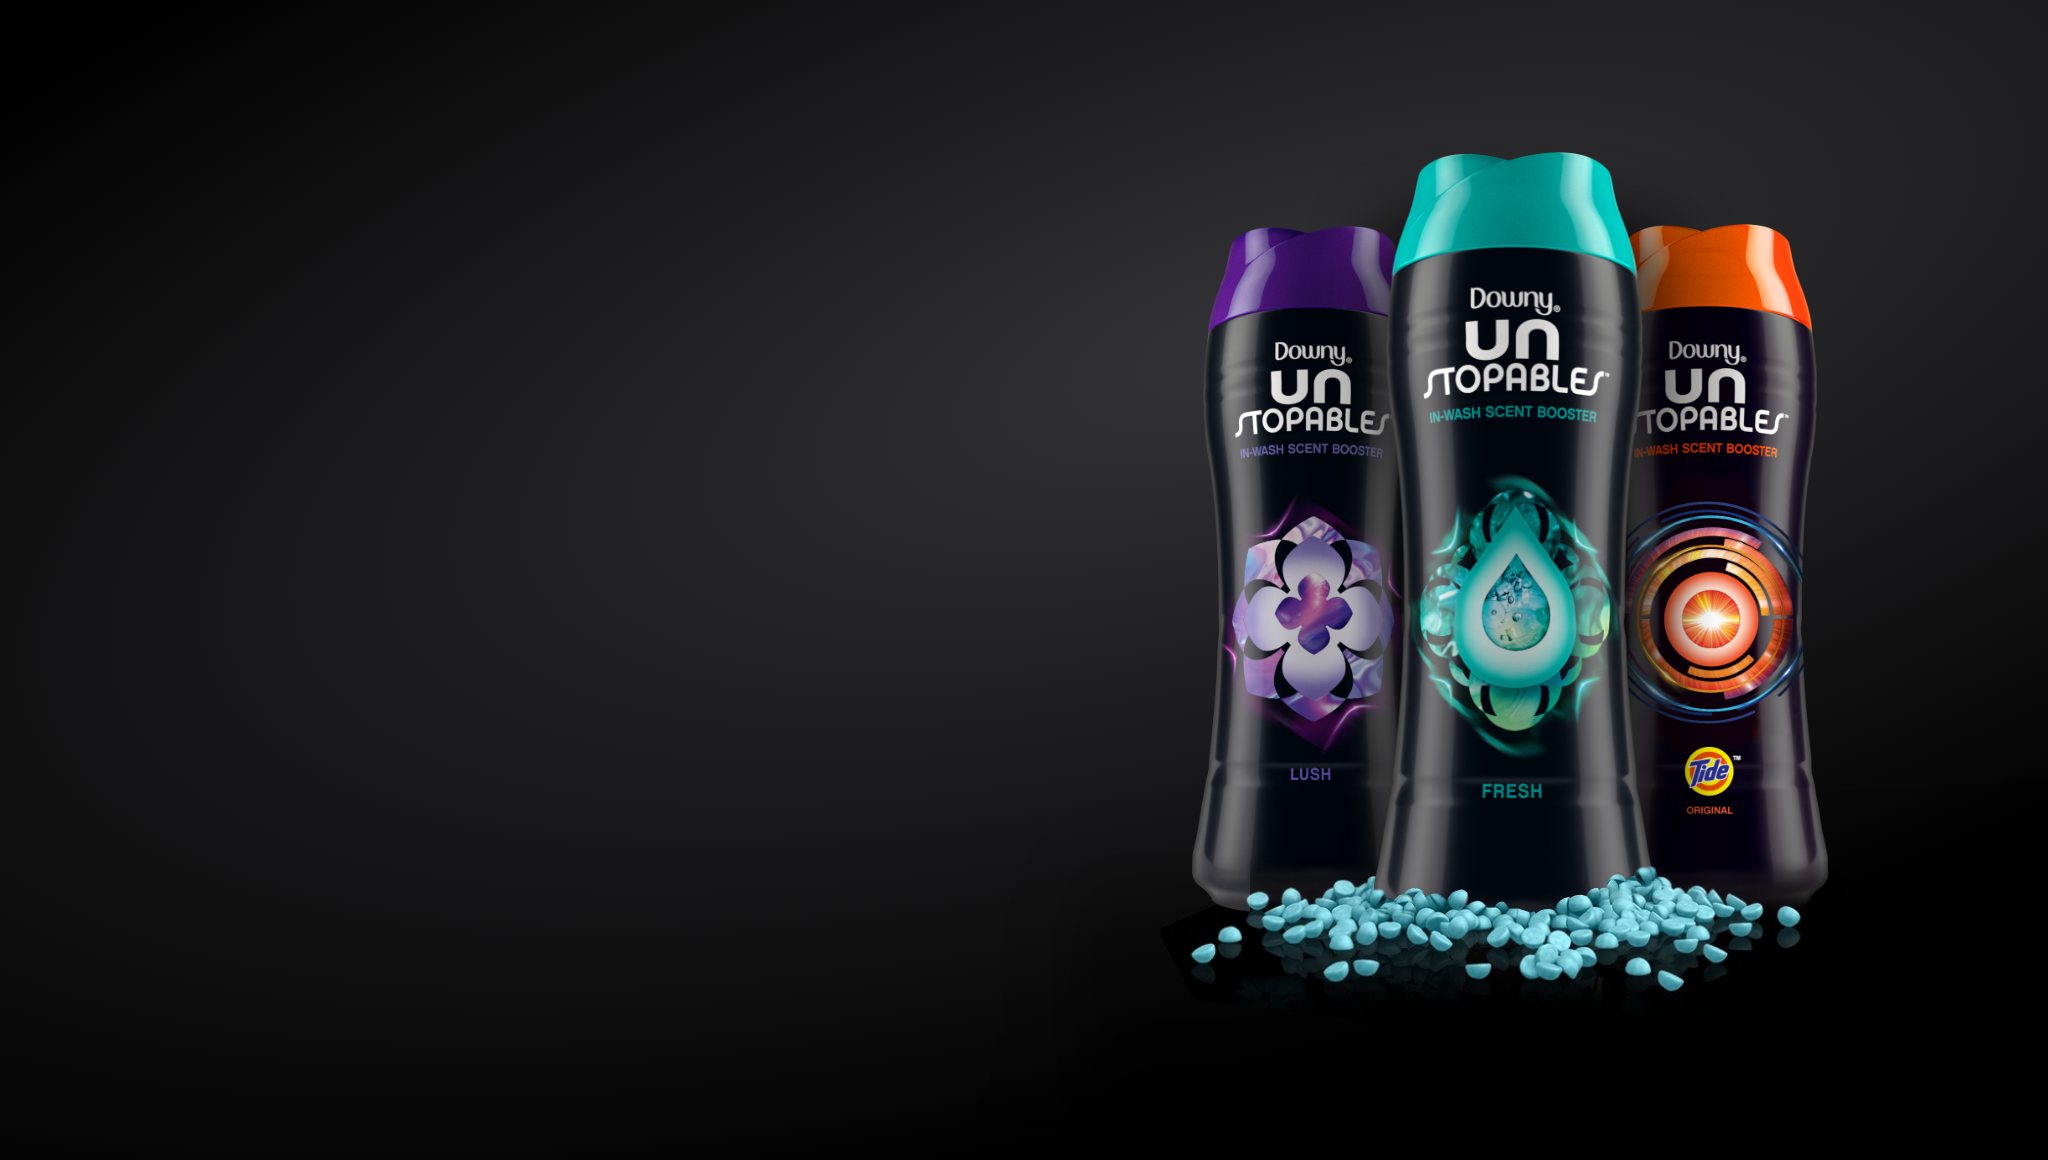 How to use Lenor Unstoppables?, Blog